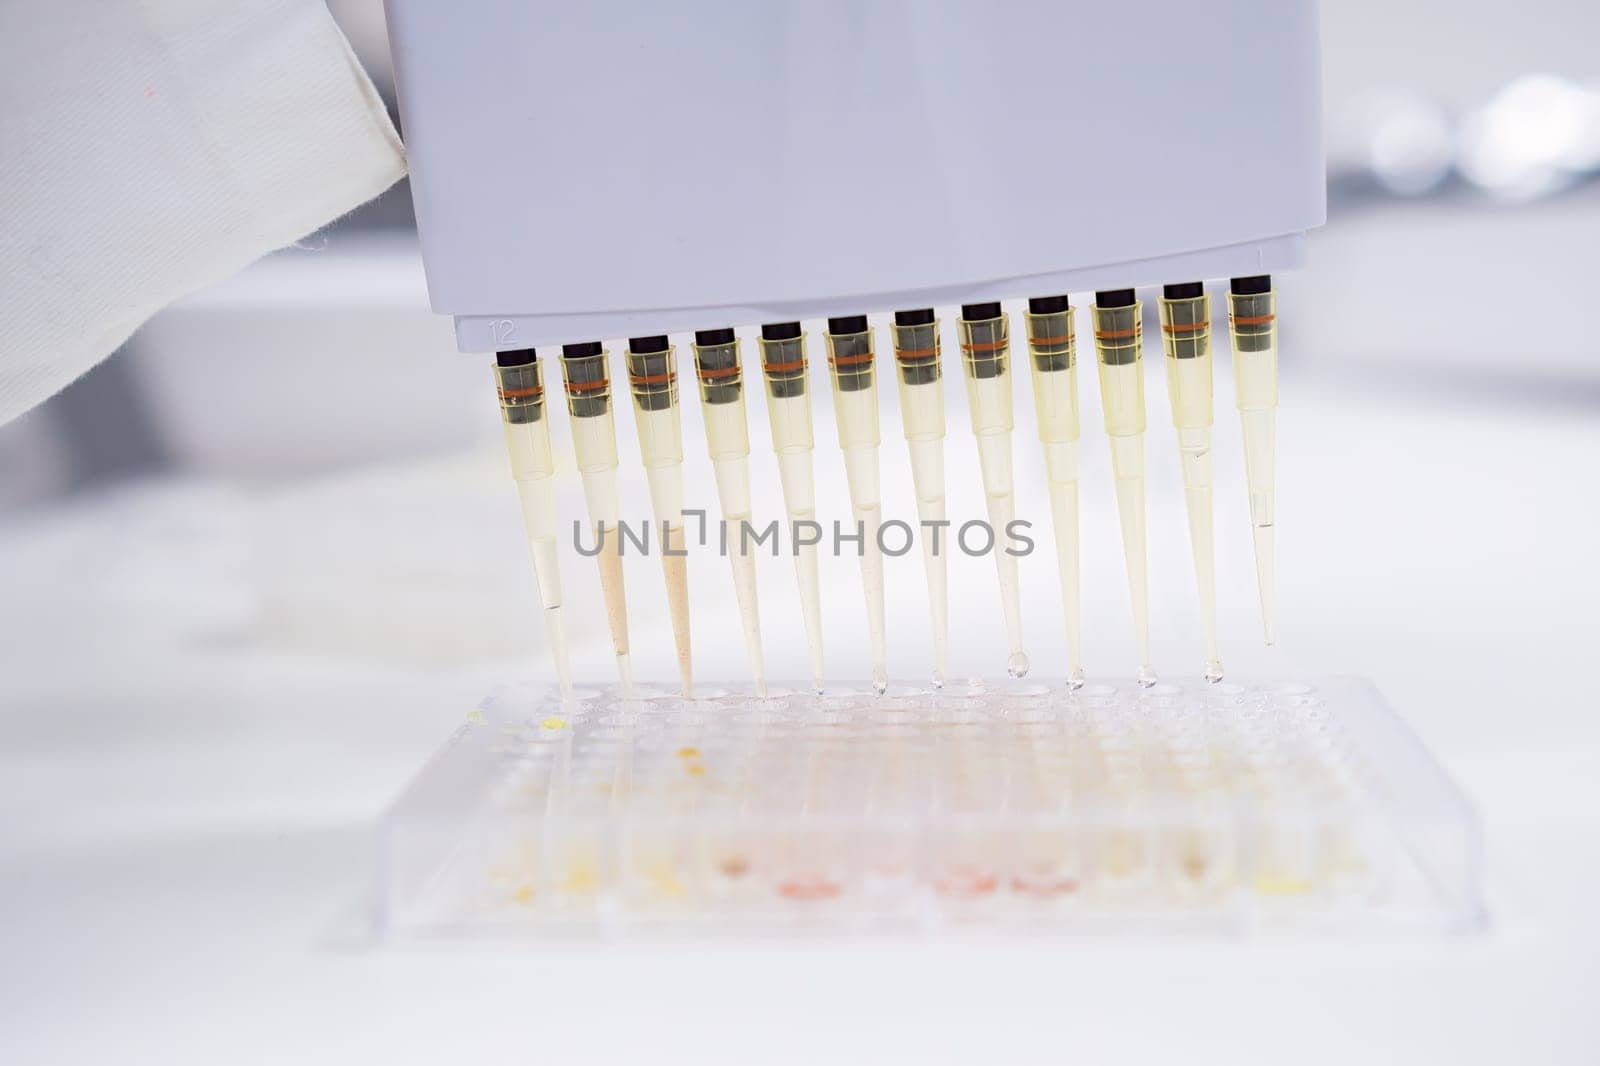 The filling of microplates for blood test testing is accomplished by scientist using a multichannel pipette dispenser.